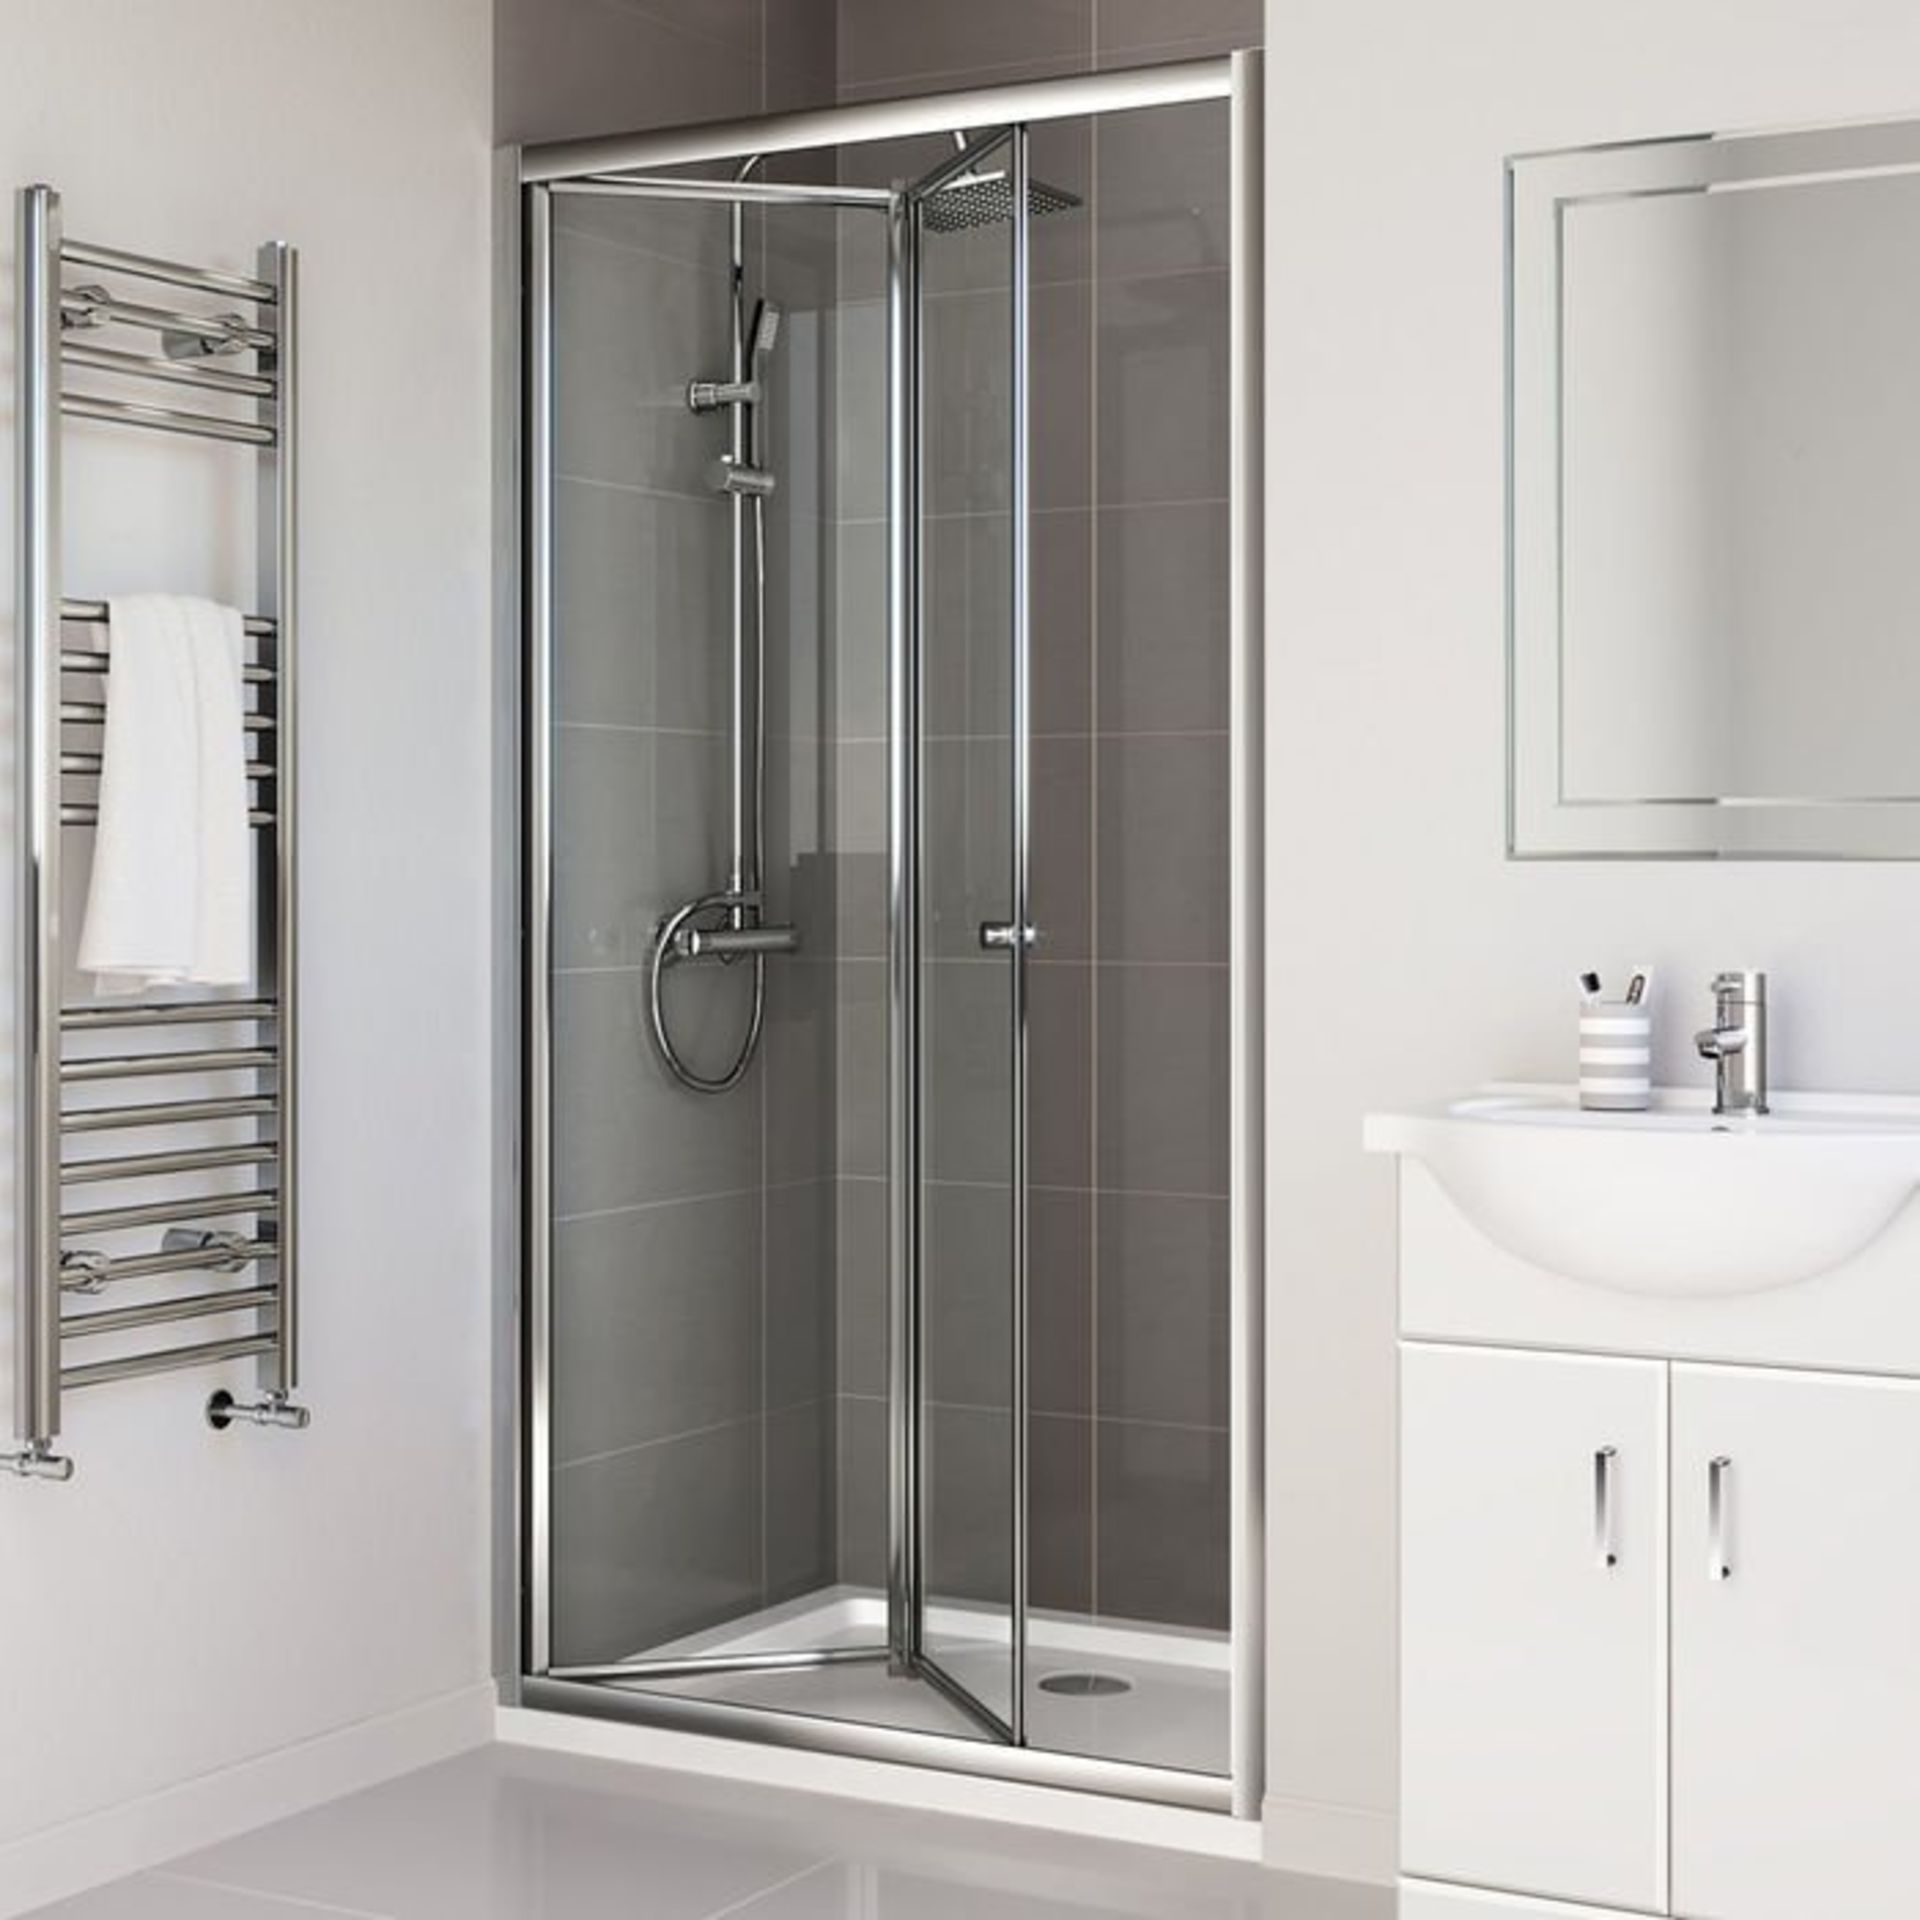 (G41) 1000mm - Elements Bi Fold Shower Door. RRP £299.99. 4mm Safety Glass Fully waterproof tested - Image 2 of 8